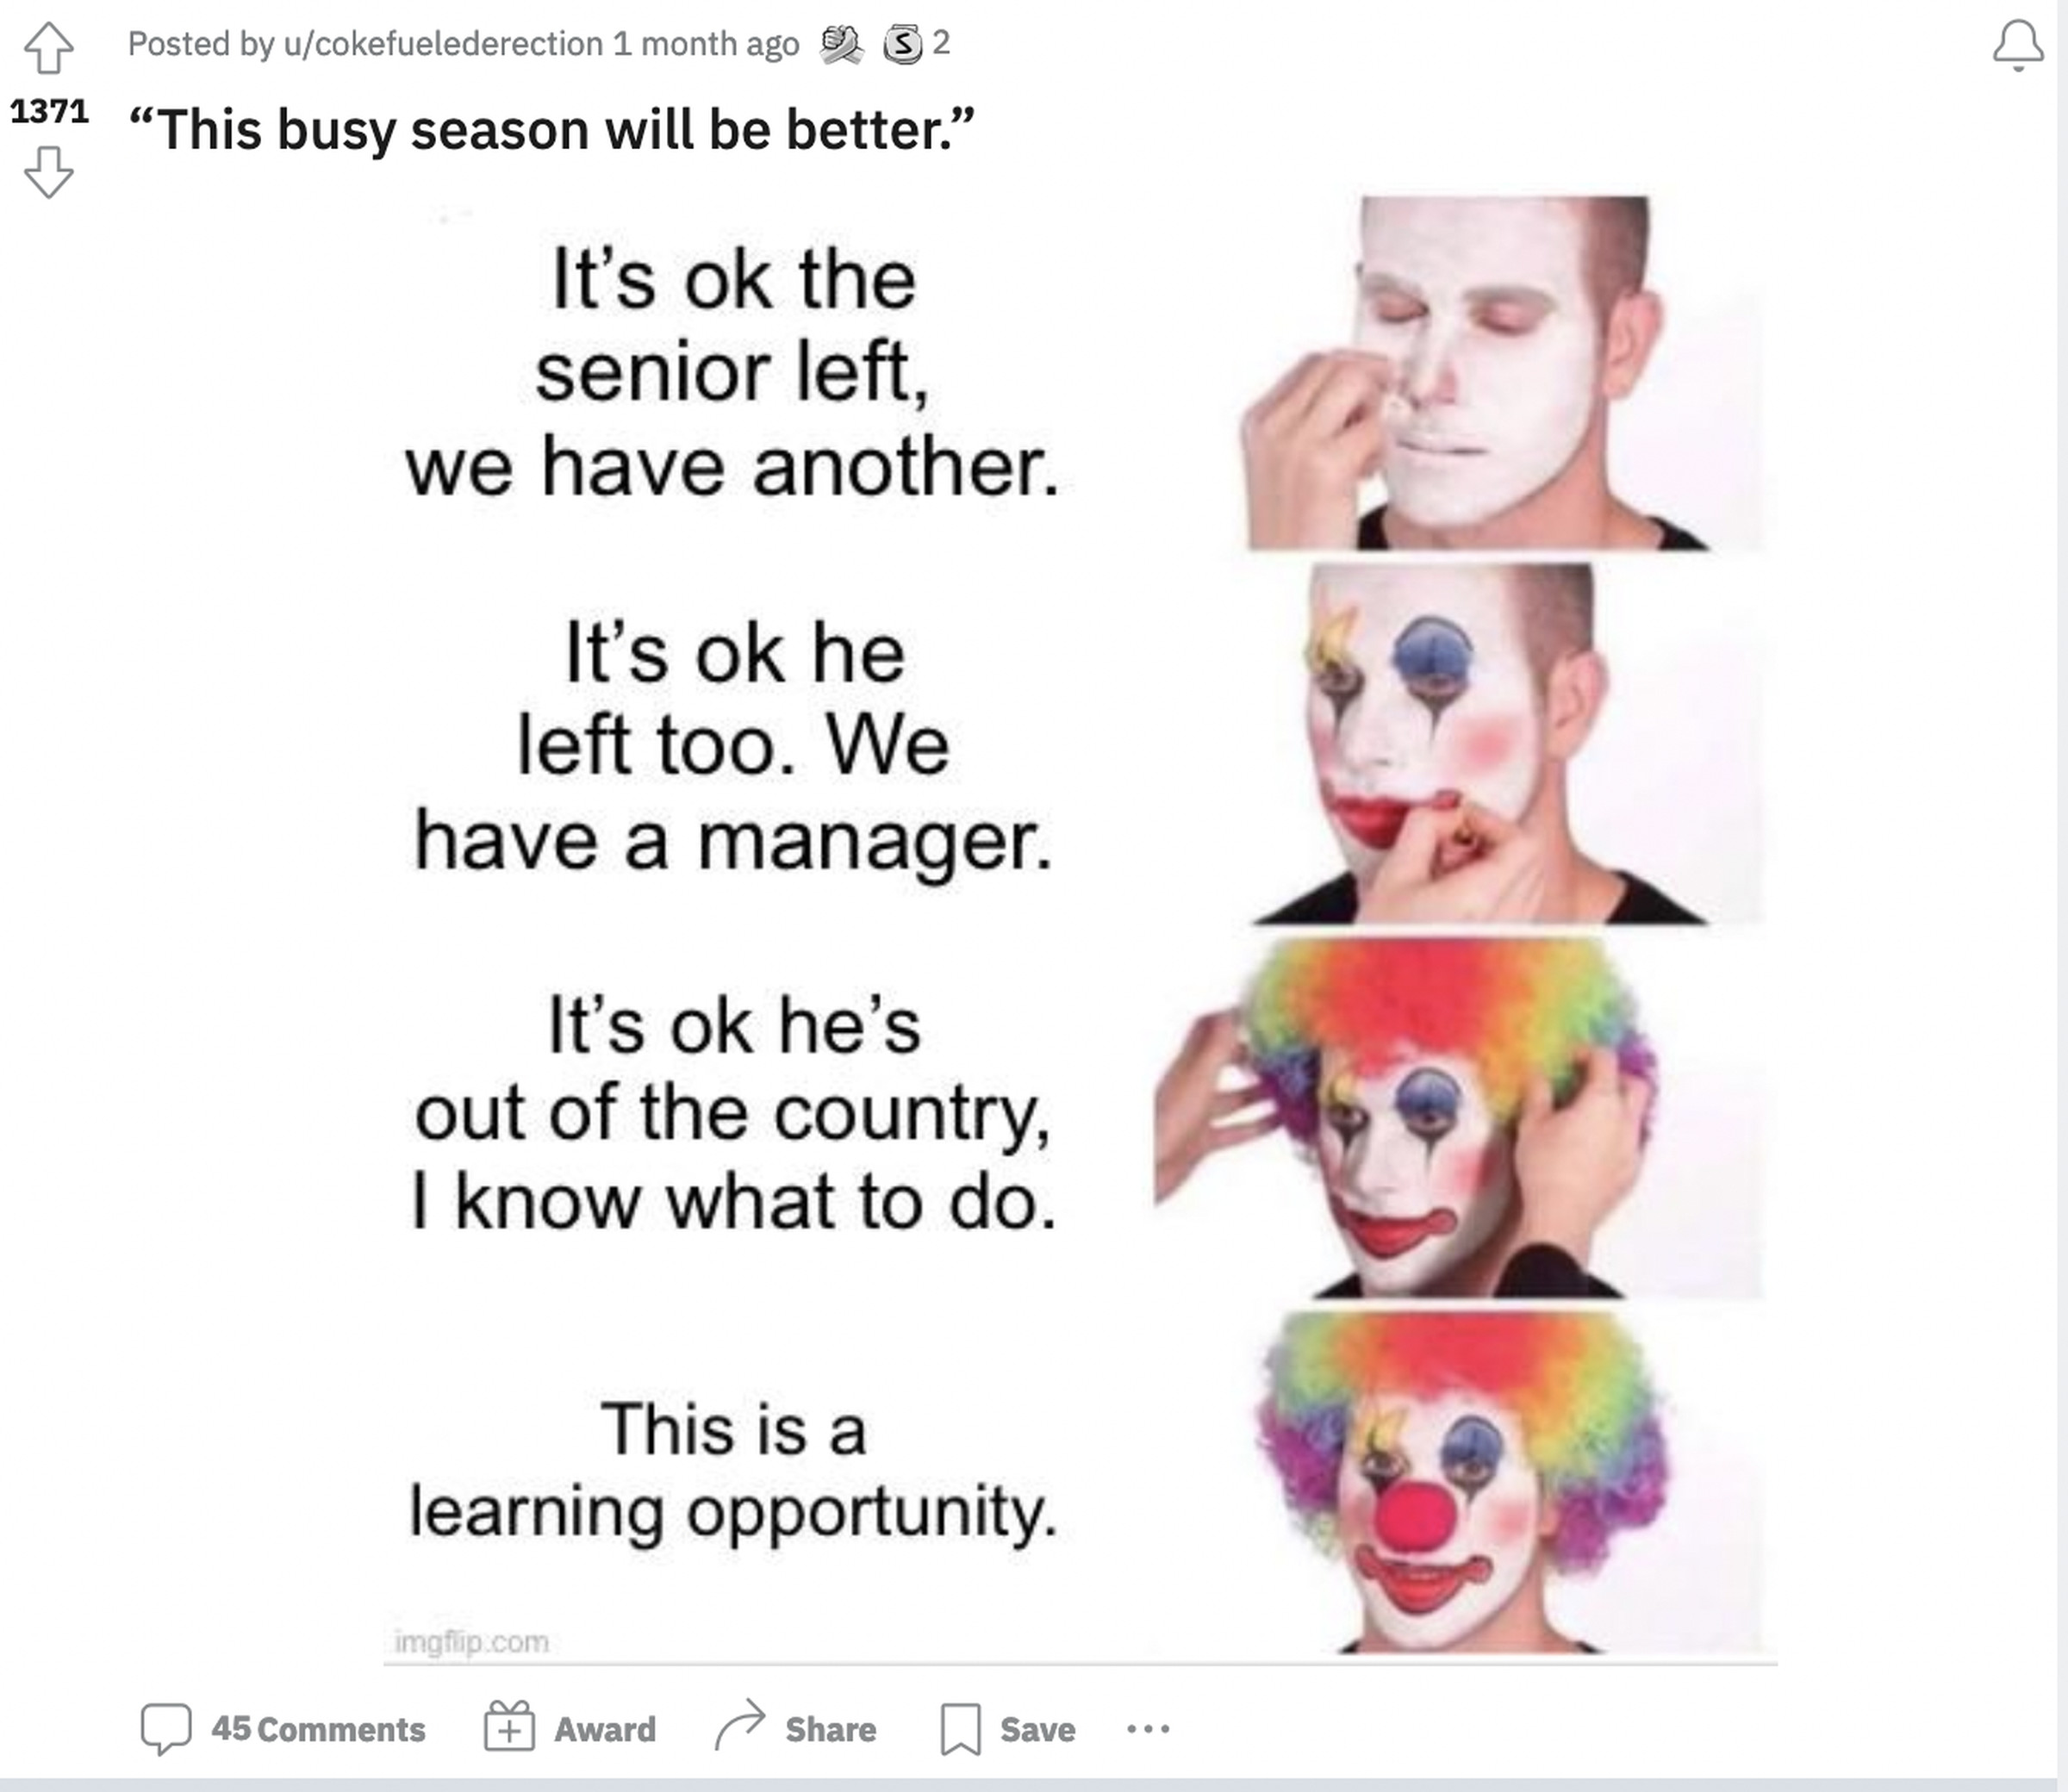 A man applies clown paint as he tells himself “It’s ok the senior left, we have another. It’s ok he left too. We have a manager. It’s ok he’s out of the country, I know what to do. This is a learning opportunity.”